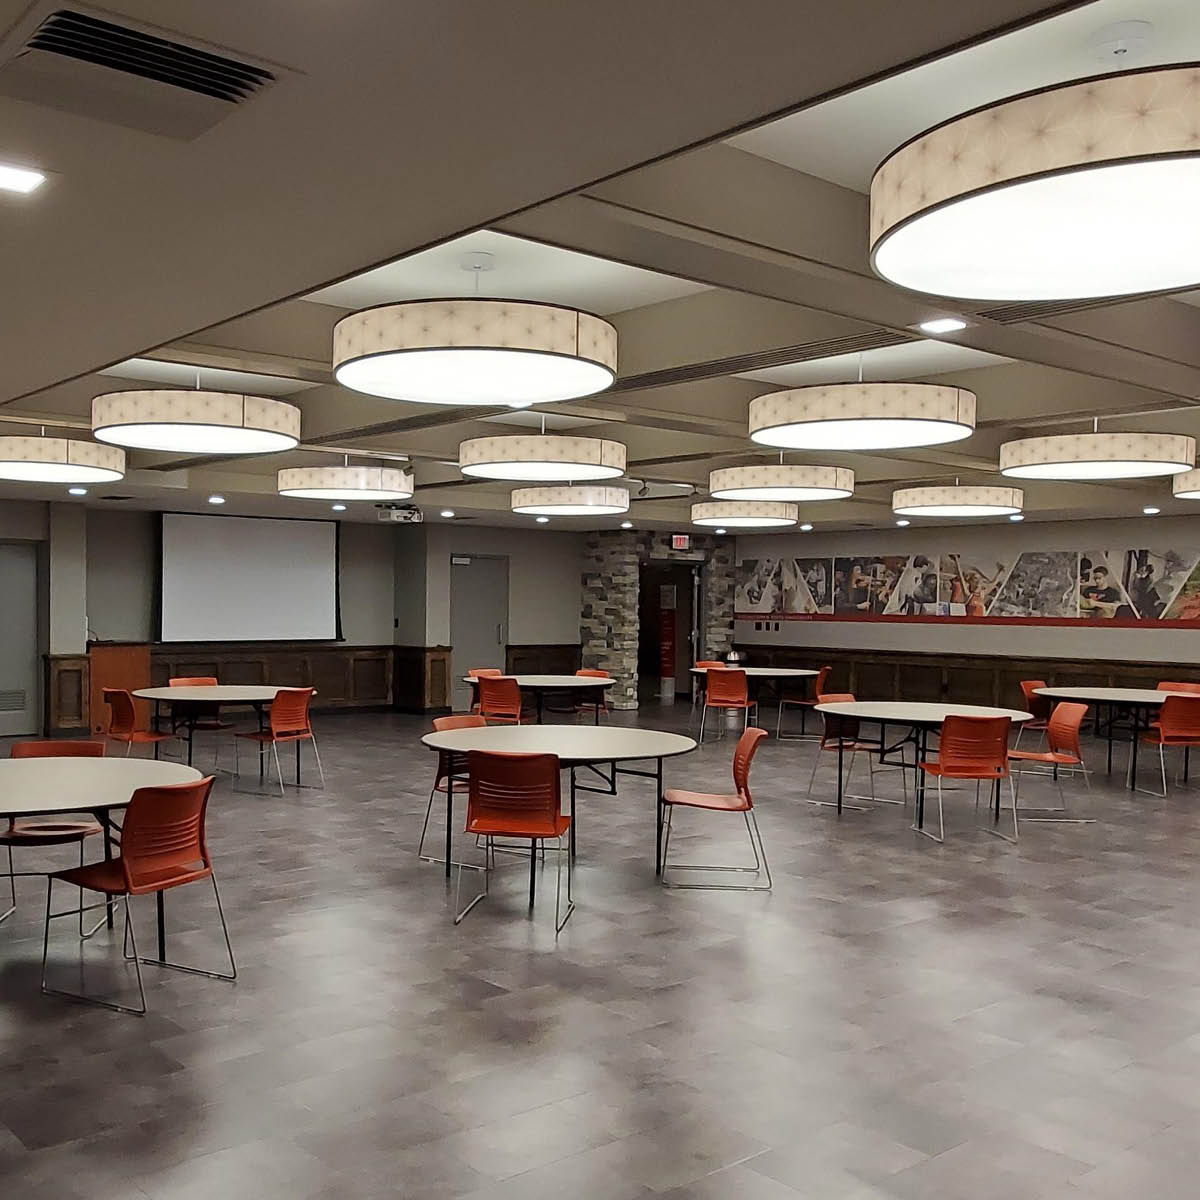 Youngstown State University opted for the installation of Lumetta’s large Modified Drum Pendants to illuminate the space.